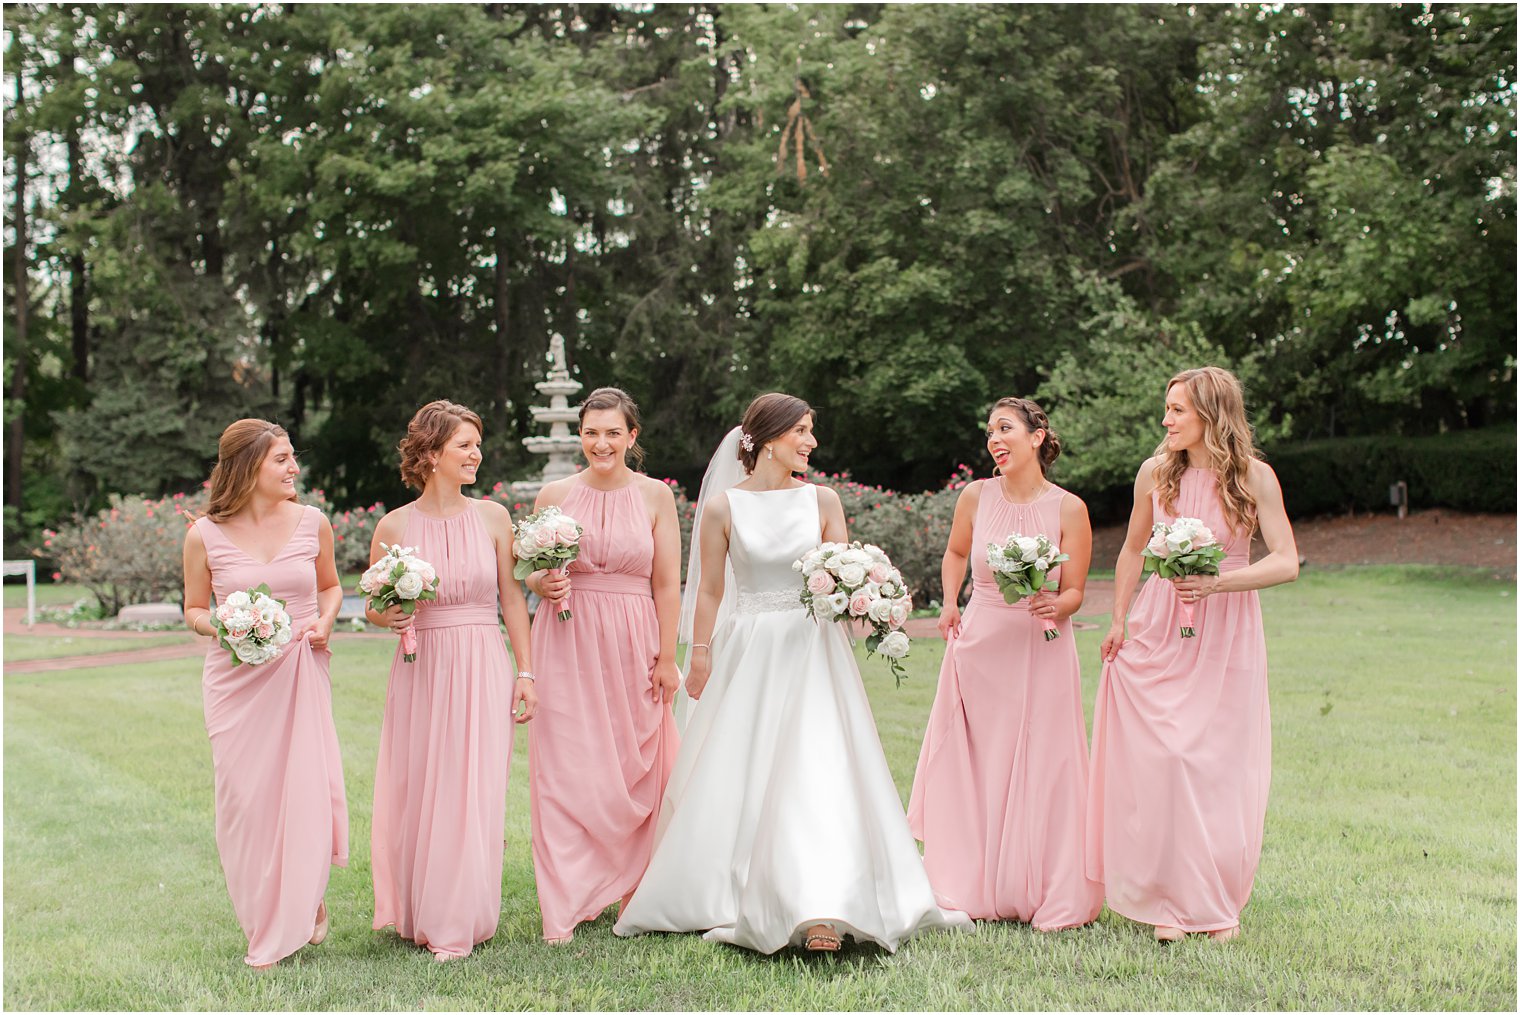 Candid photo of bridesmaids in pink dresses